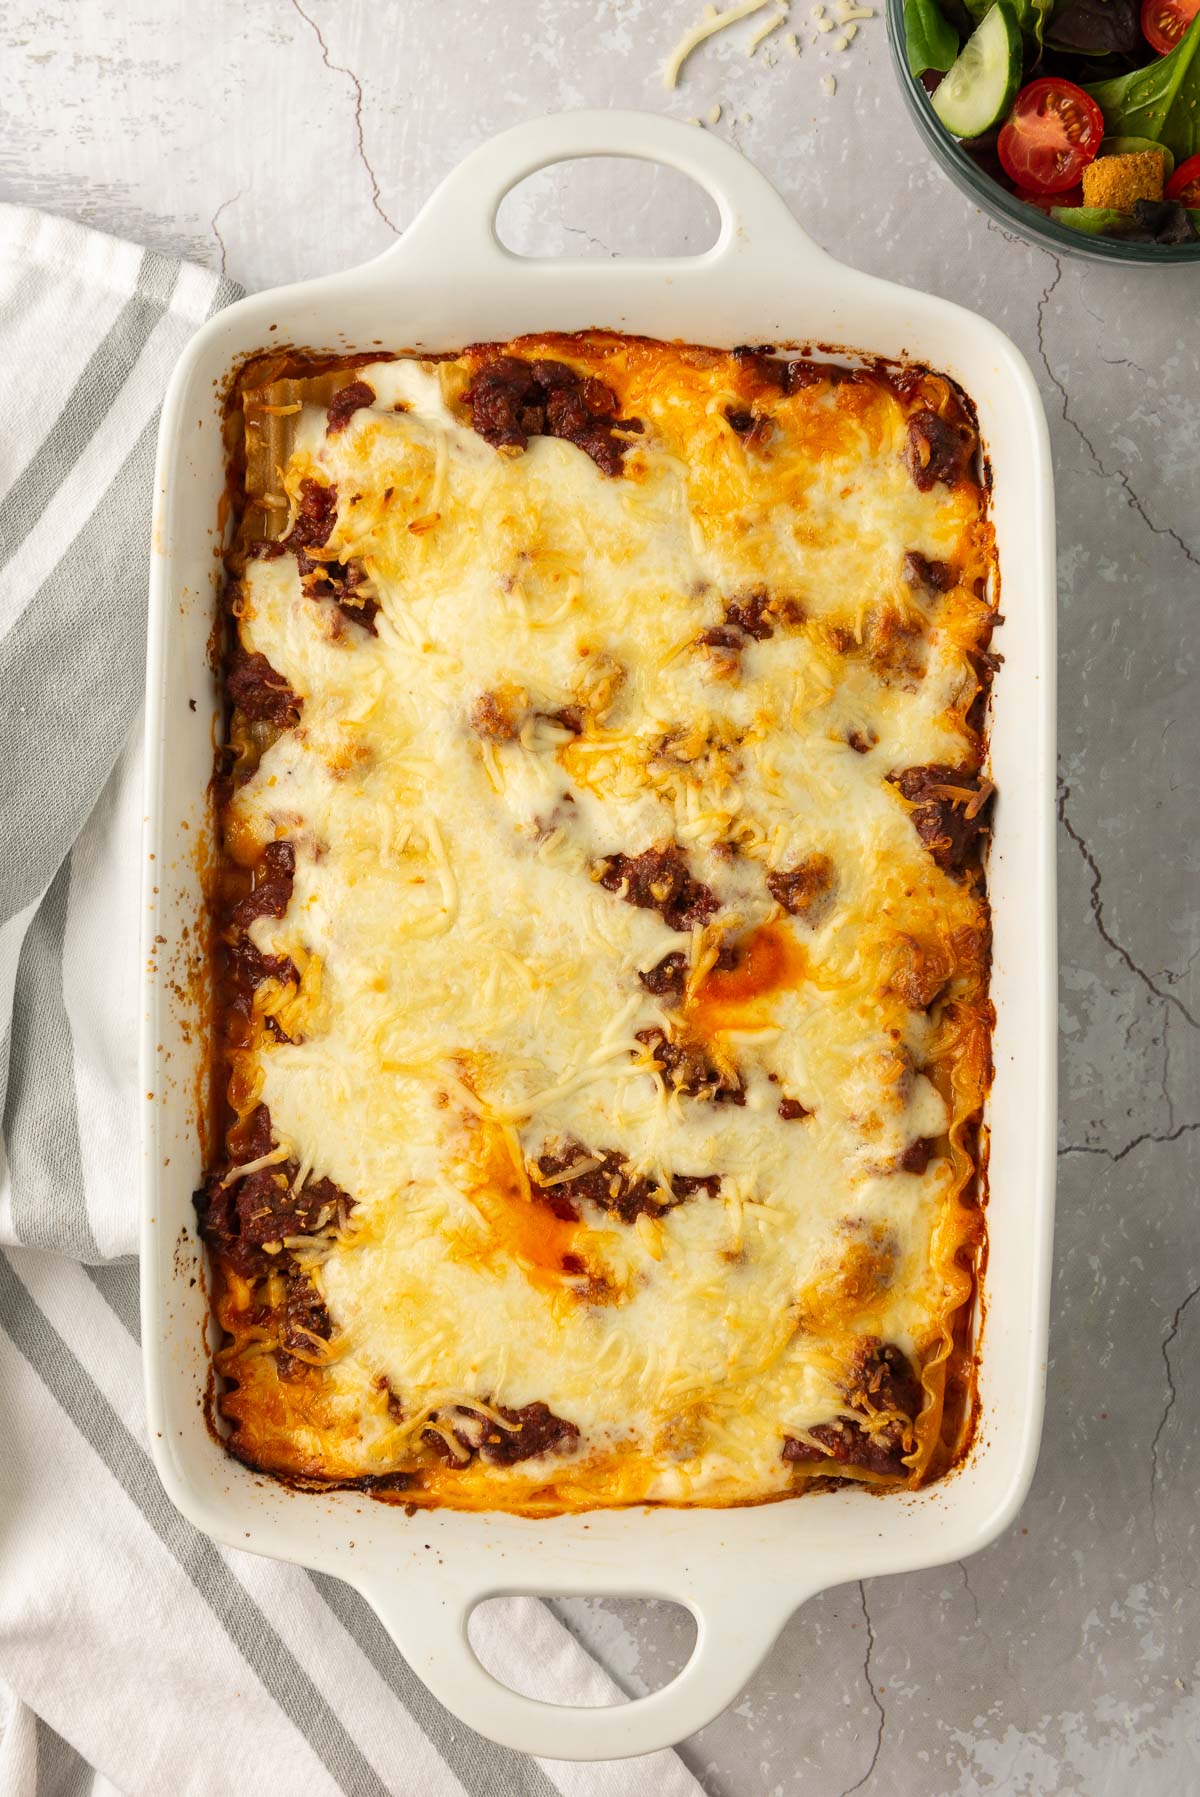 A fully cooked lasagna in a white dish accented with a white and grey kitchen towel.